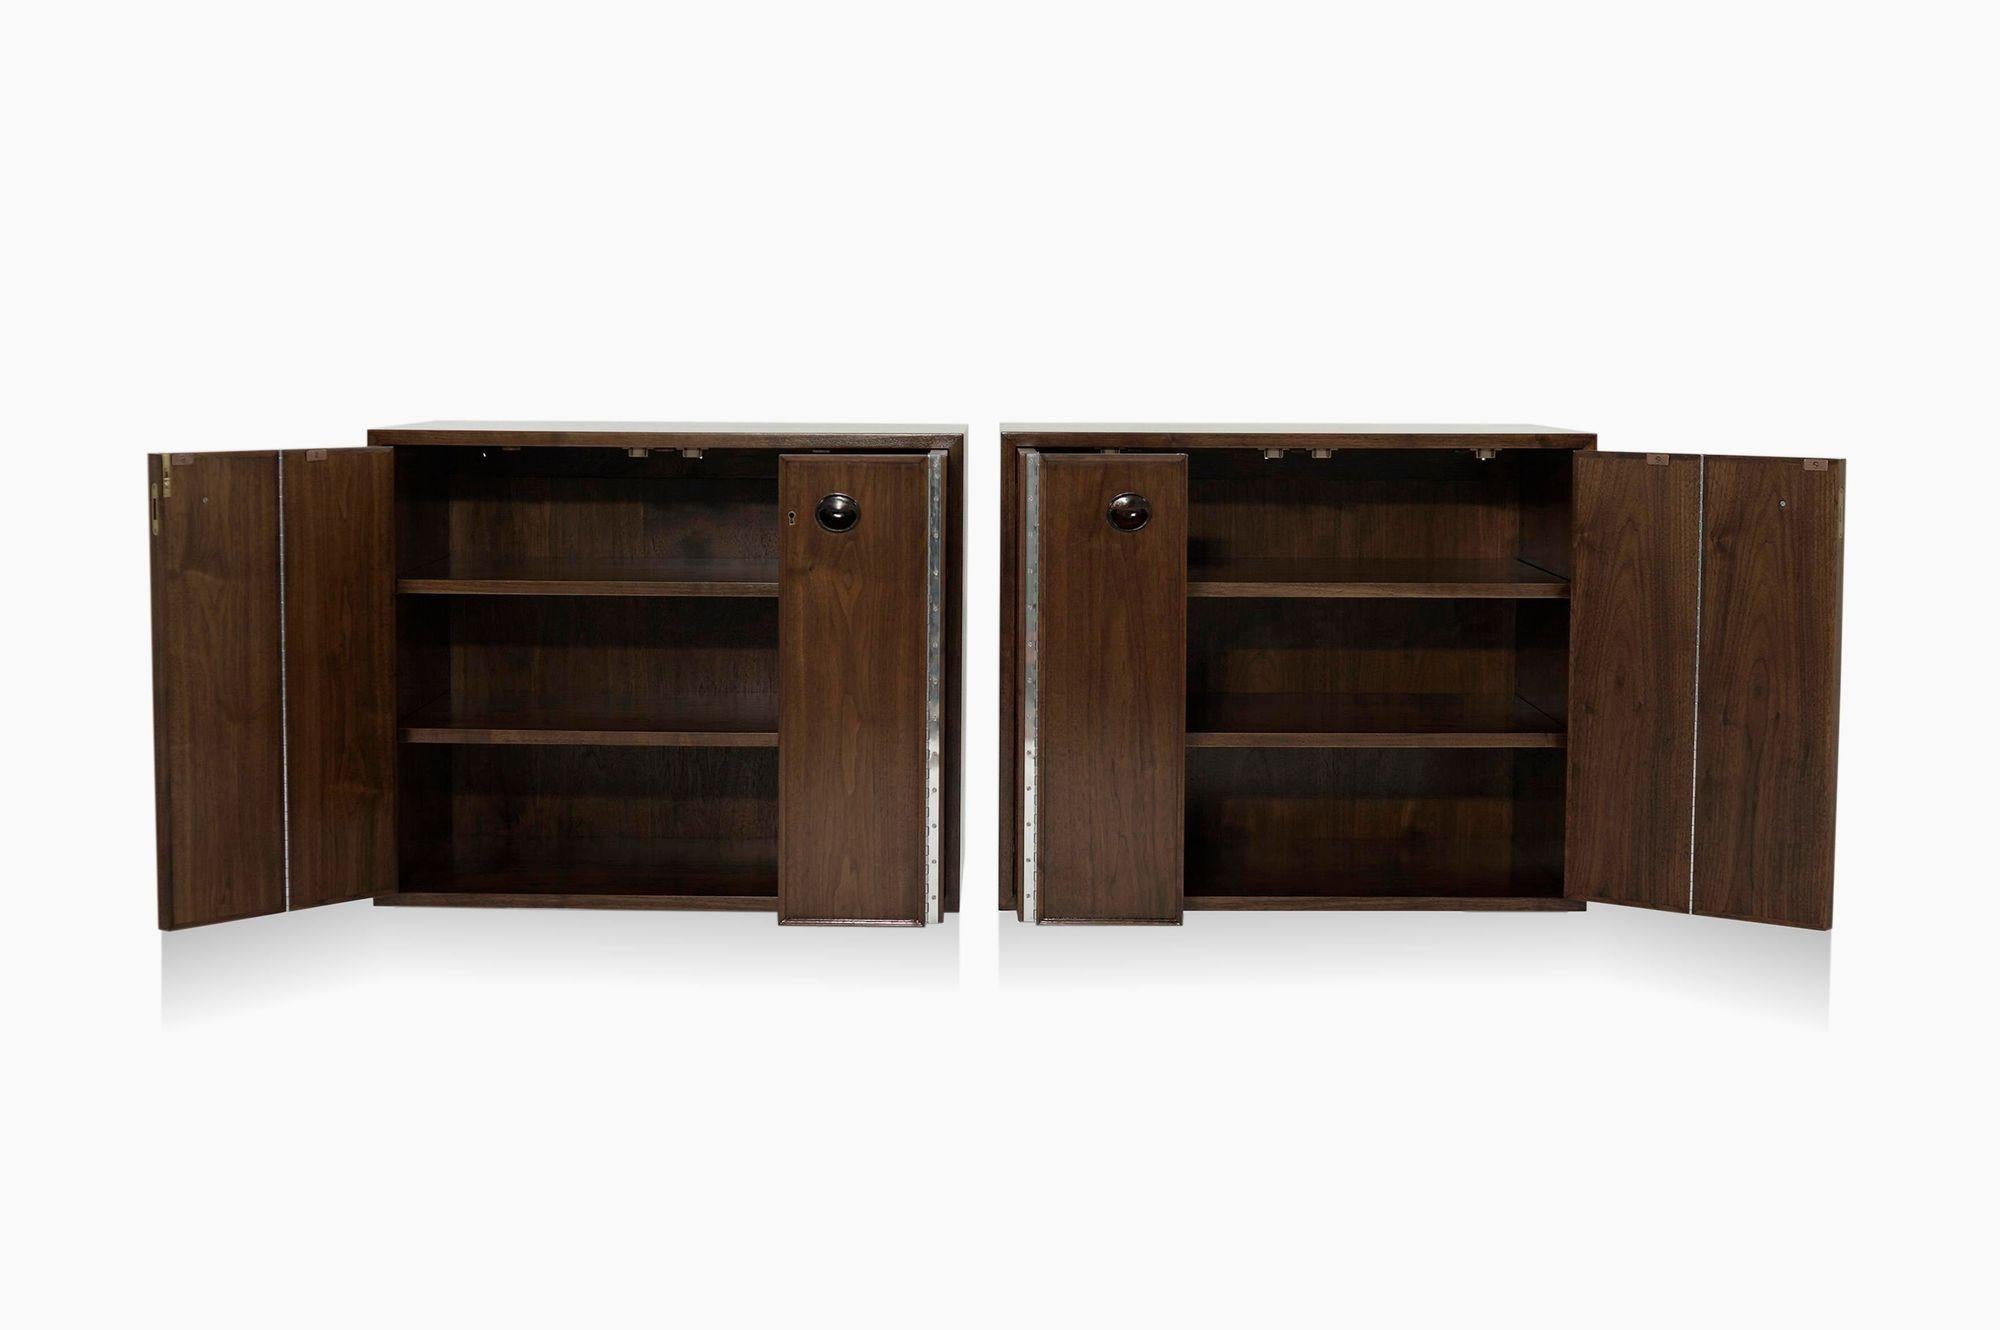 Elevate your interior with these exquisite mid-century floating cabinets, masterfully designed by the iconic Edward Wormley for Dunbar in the 1950s and meticulously restored to their original glory by Stamford Modern. Crafted from rich walnut, these